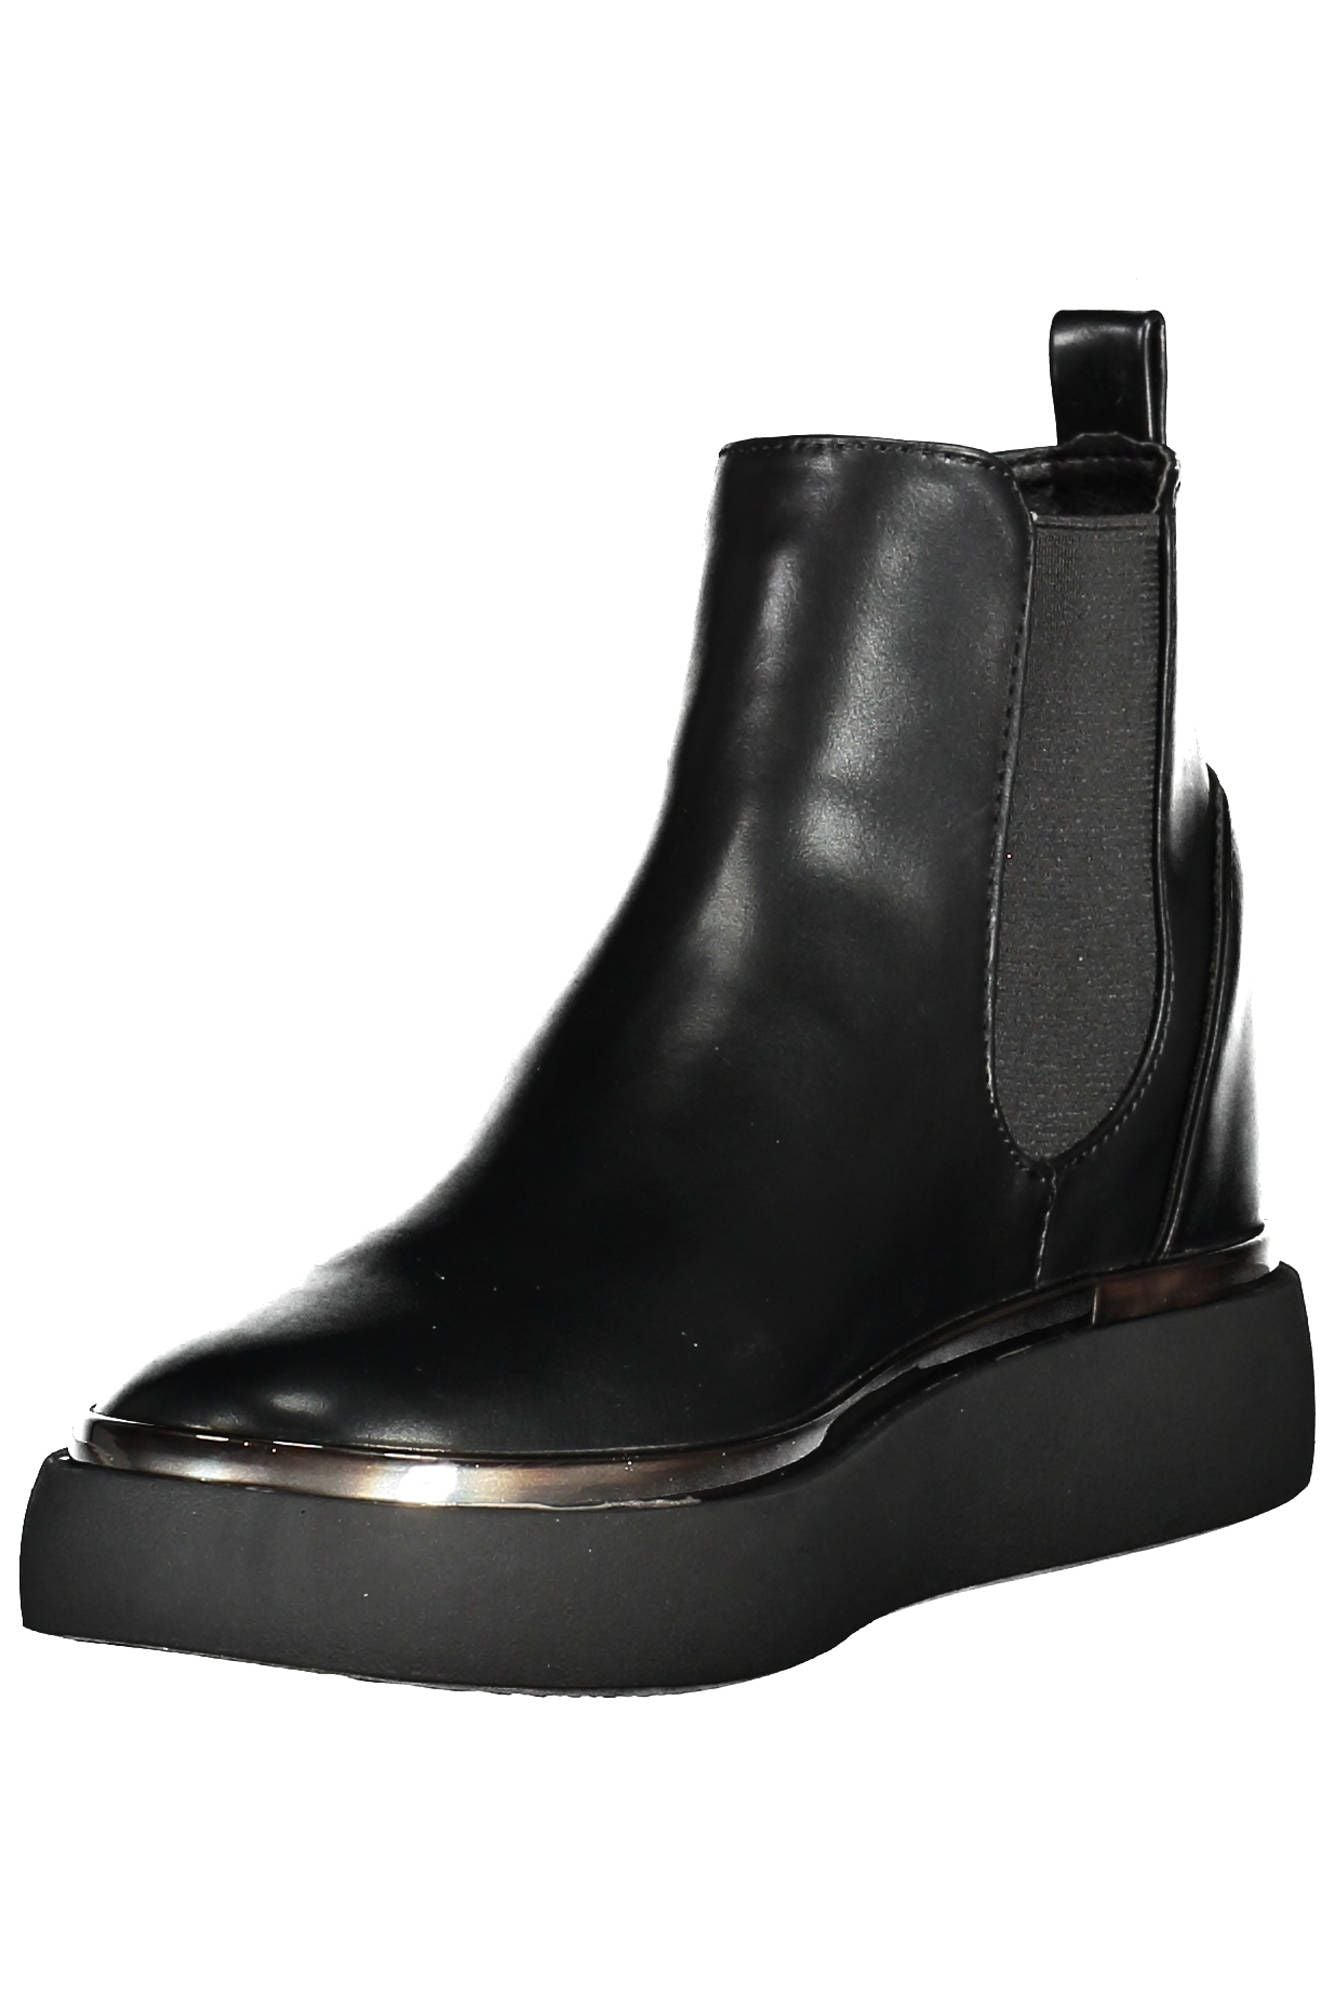 U.S. POLO ASSN. Chic Low Ankle Boot with Contrasting Details